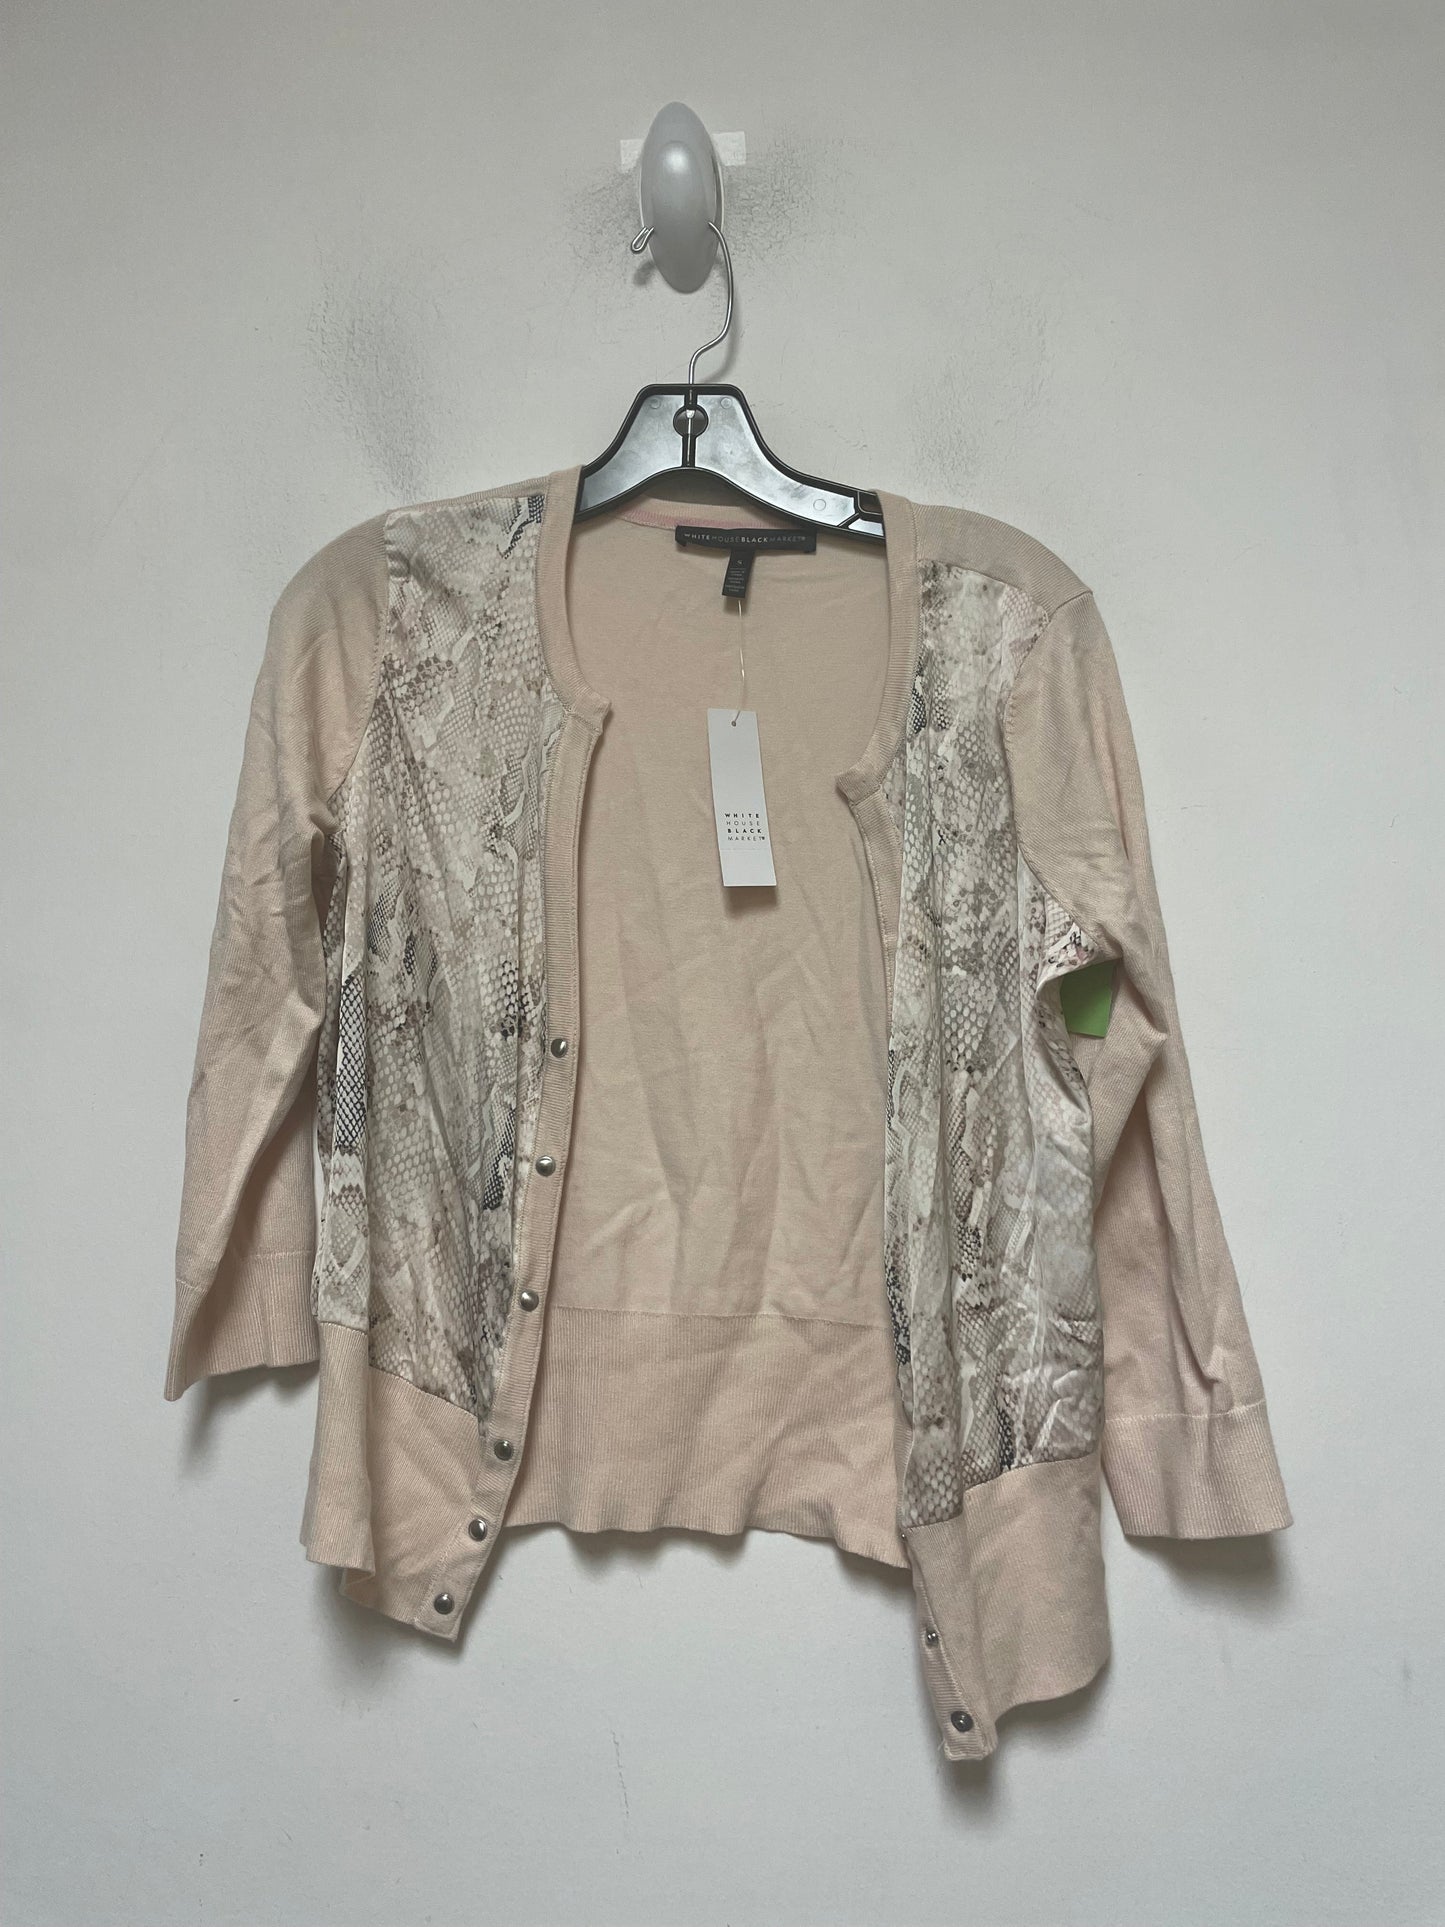 Sweater Cardigan By White House Black Market  Size: S